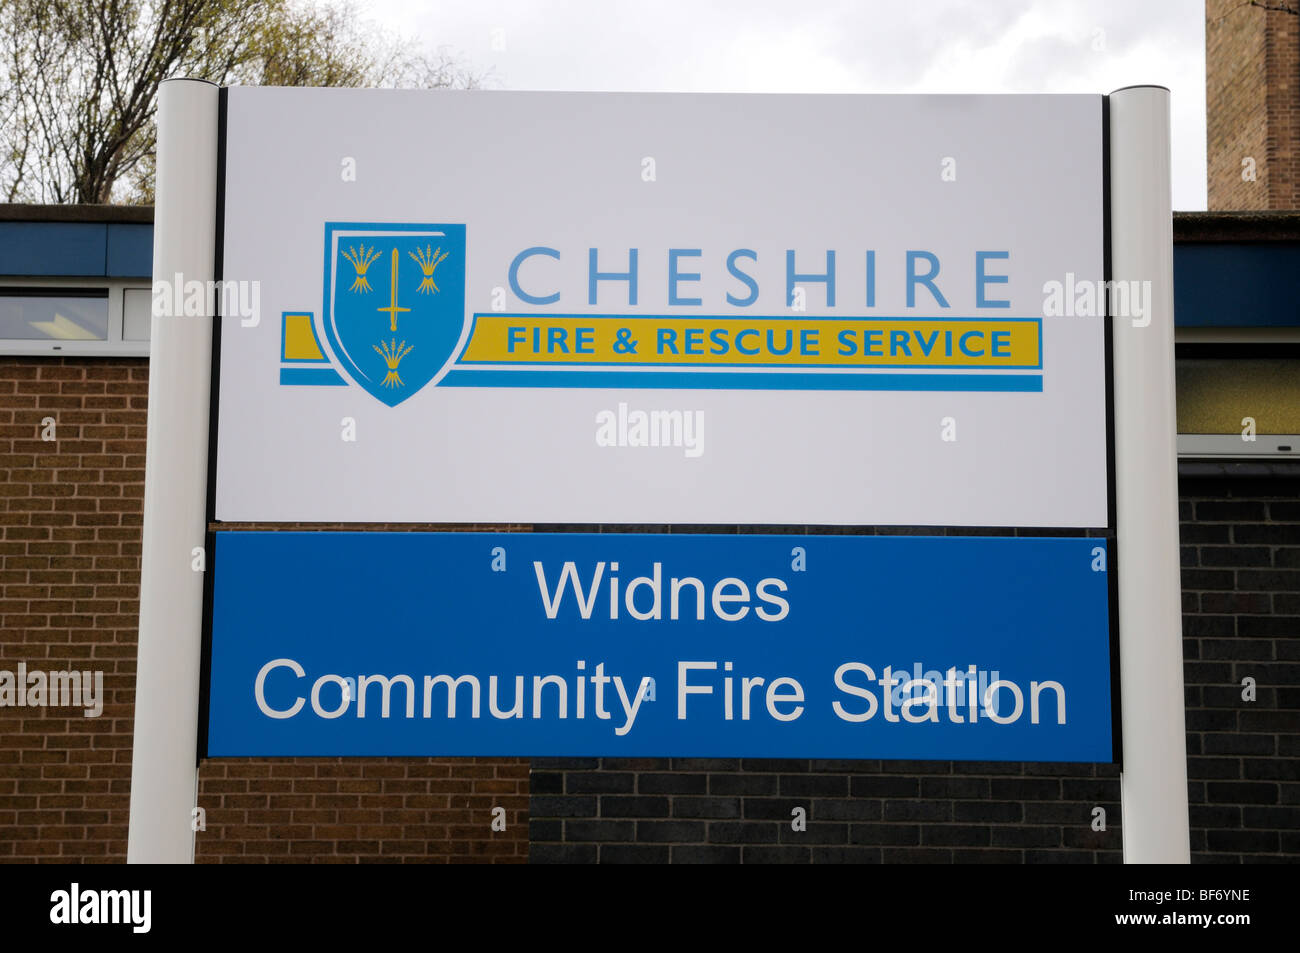 Cheshire Fire Service Widnes Community Fire Station Stock Photo